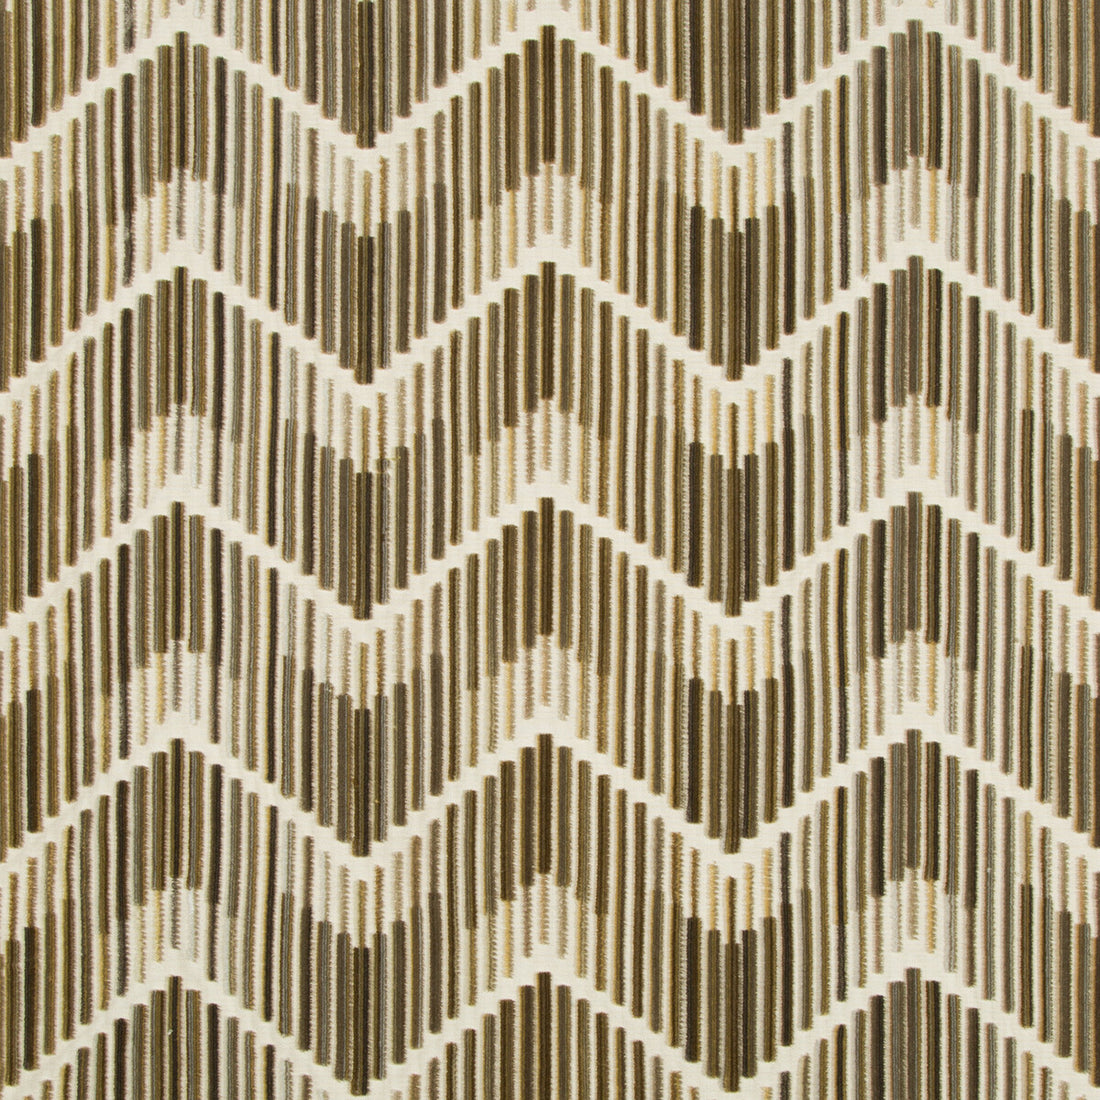 Highs And Lows fabric in truffle color - pattern 34553.16.0 - by Kravet Couture in the Artisan Velvets collection